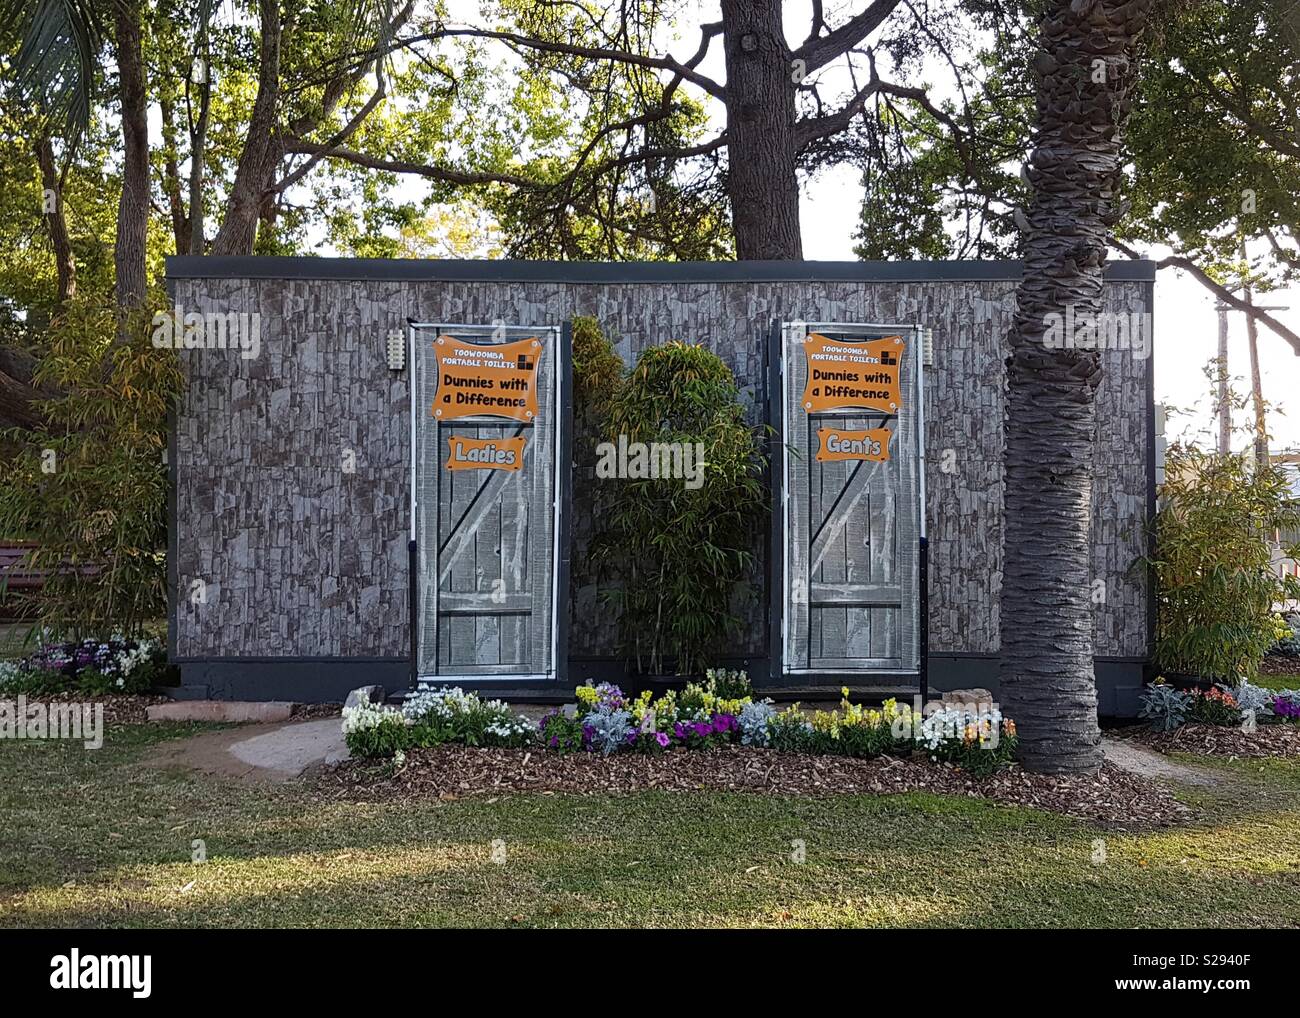 Unusual toilet block at the Toowoomba Festival of Flowers, held annually in Toowoomba, Queensland, Australia. Stock Photo